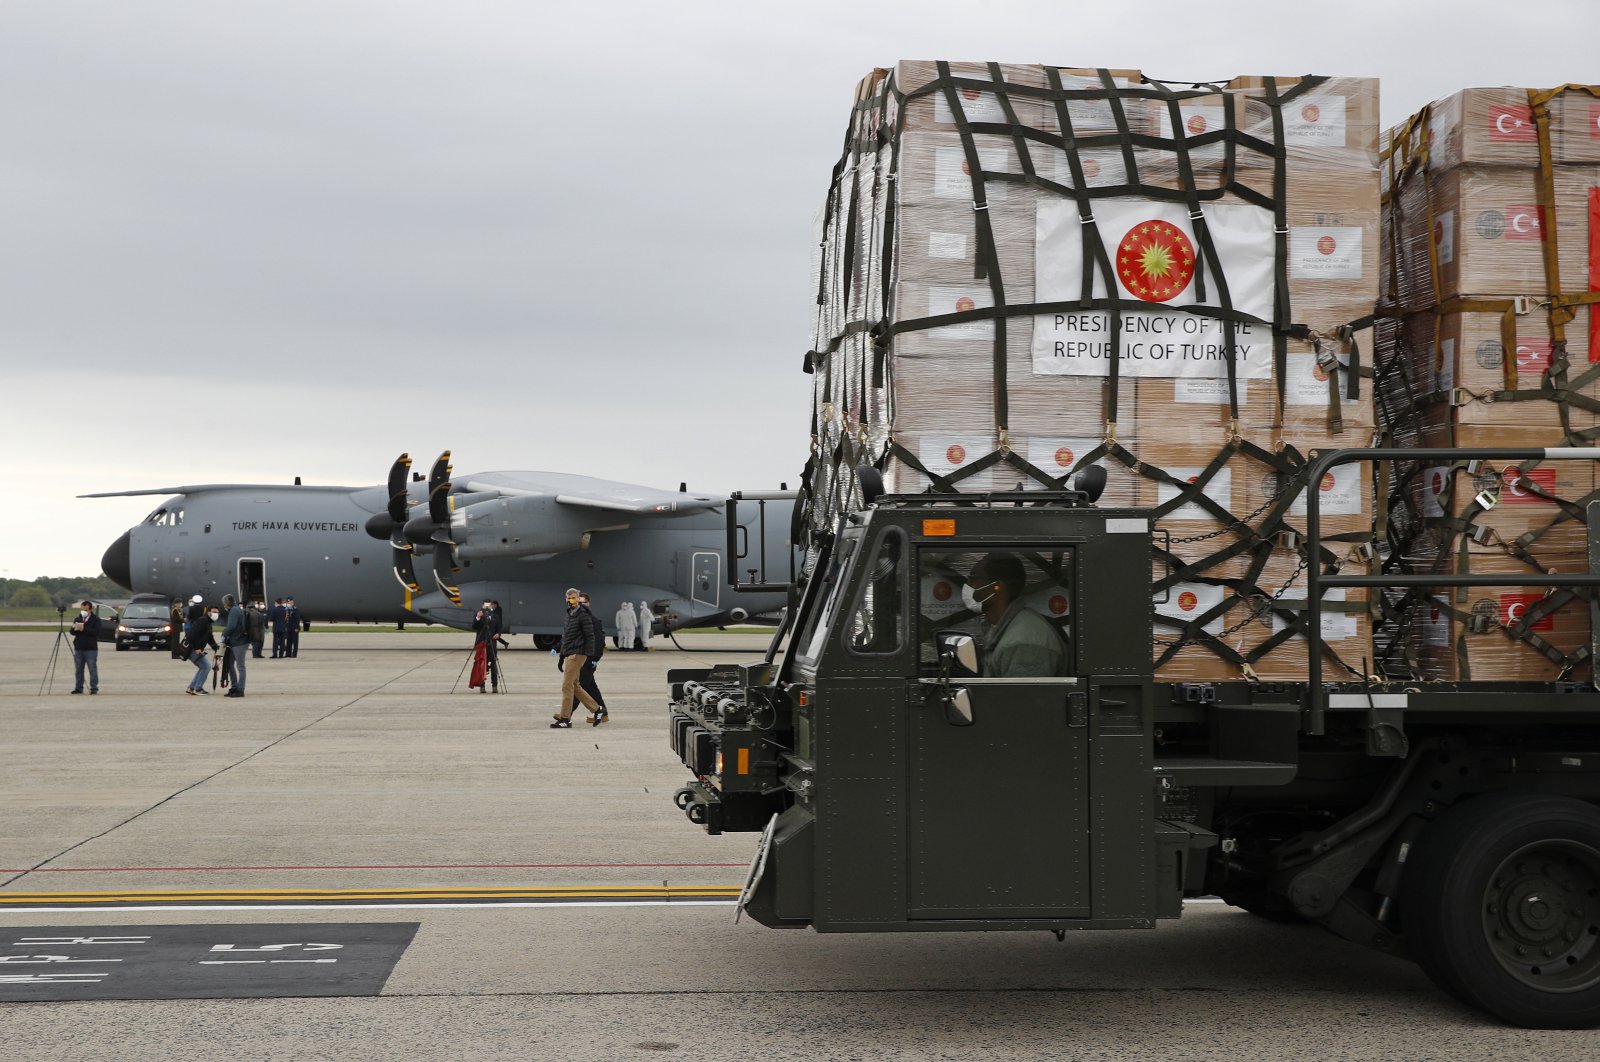 A U.S. Air Force vehicle carries a donation of medical supplies from Turkey at Andrews Air Force Base, Maryland, U.S., April 28, 2020. (AP PHOTO)